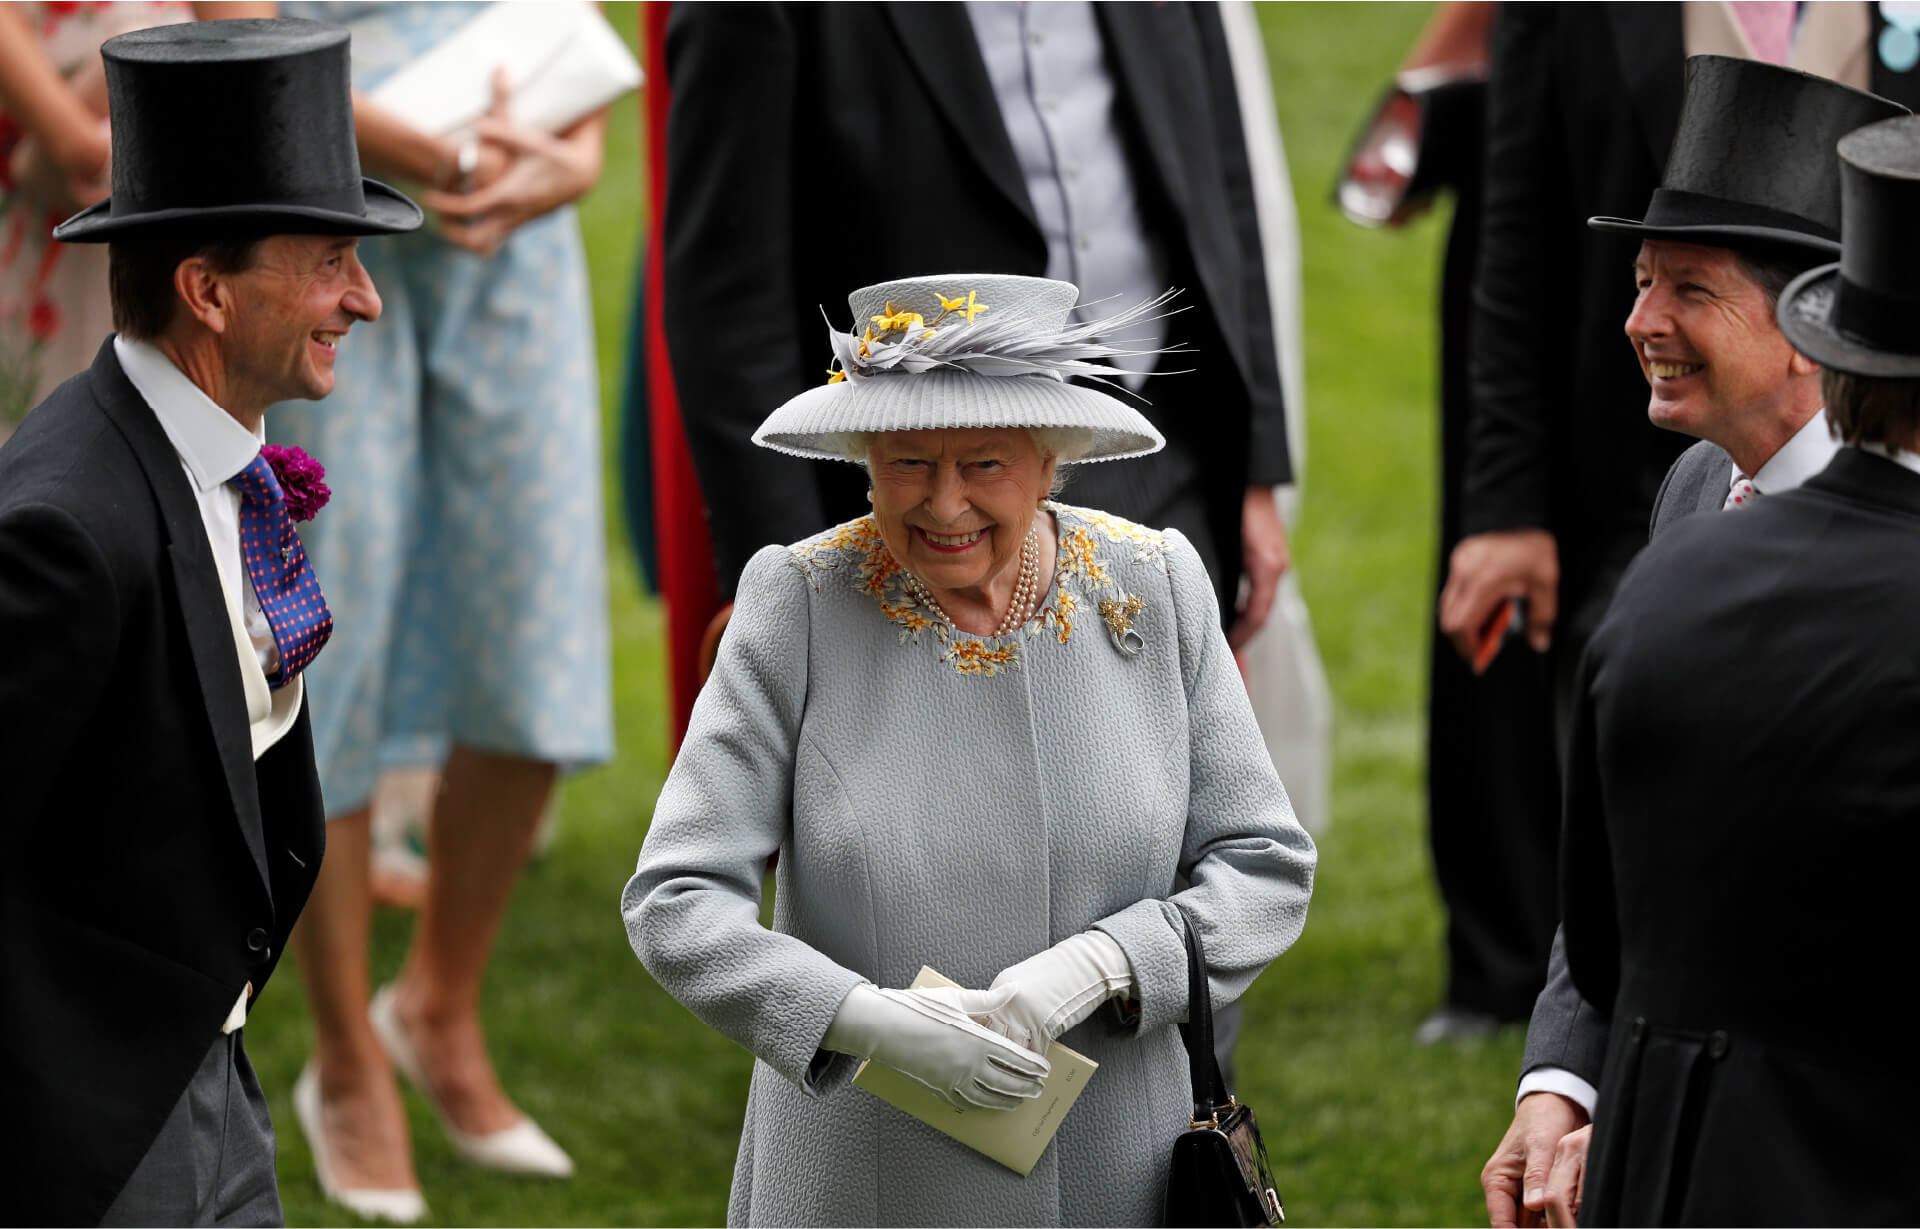 Queen Elizabeth wearing a grey coat embroidered with yellow flowers around the collar, with a matching medium brimmed grey hat that is adorned with feathers and yellow flowers. She is surrounded by men in black top hats and tails.